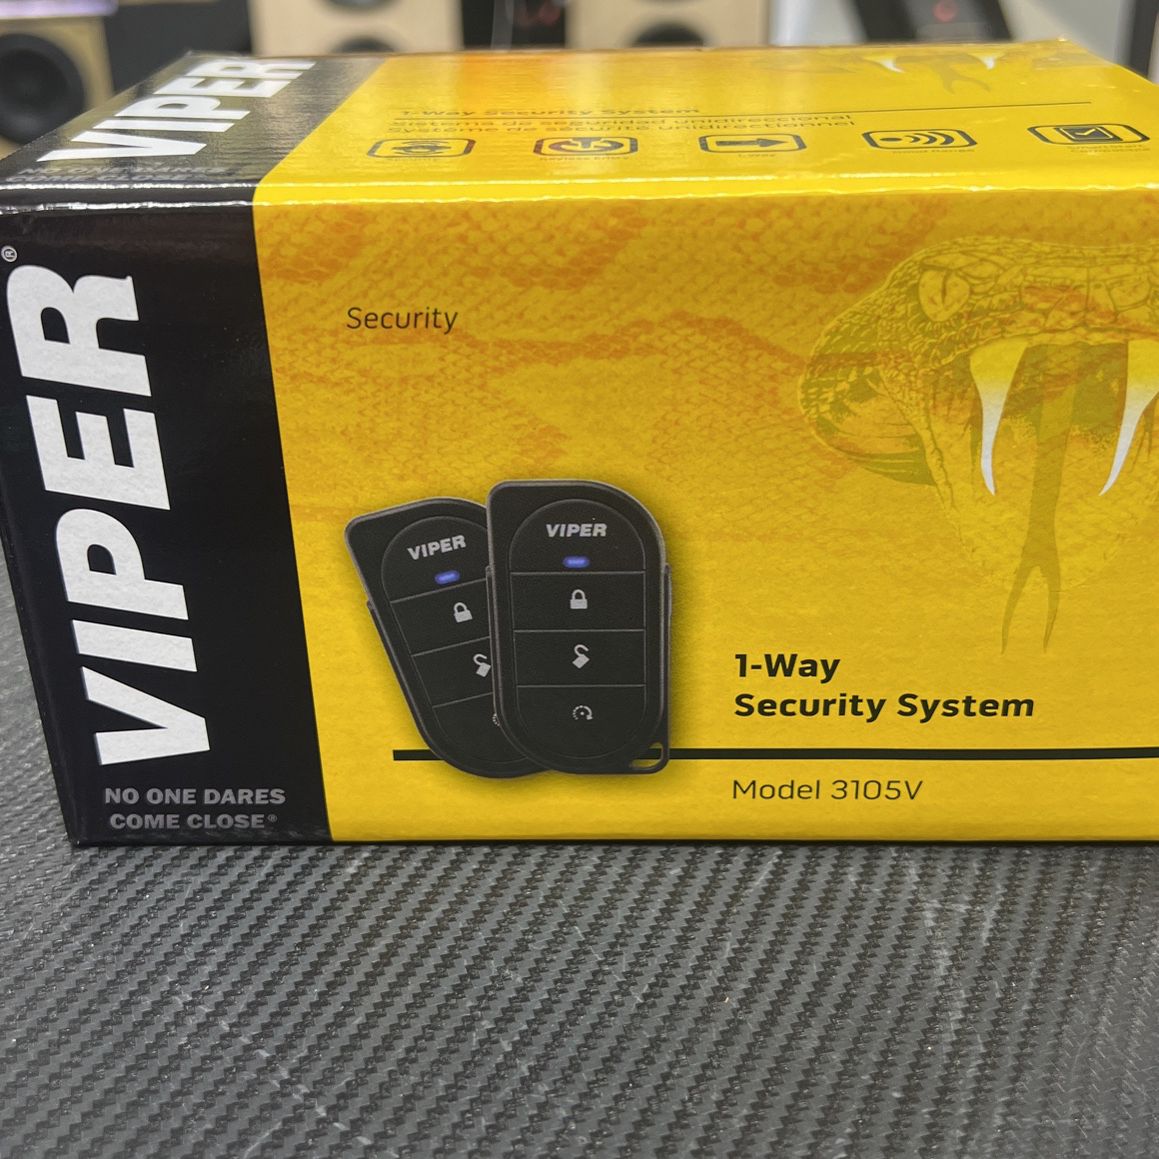 viper Car Alarm With Two Remote Controls And Ignition Cal On Sale For Only 79